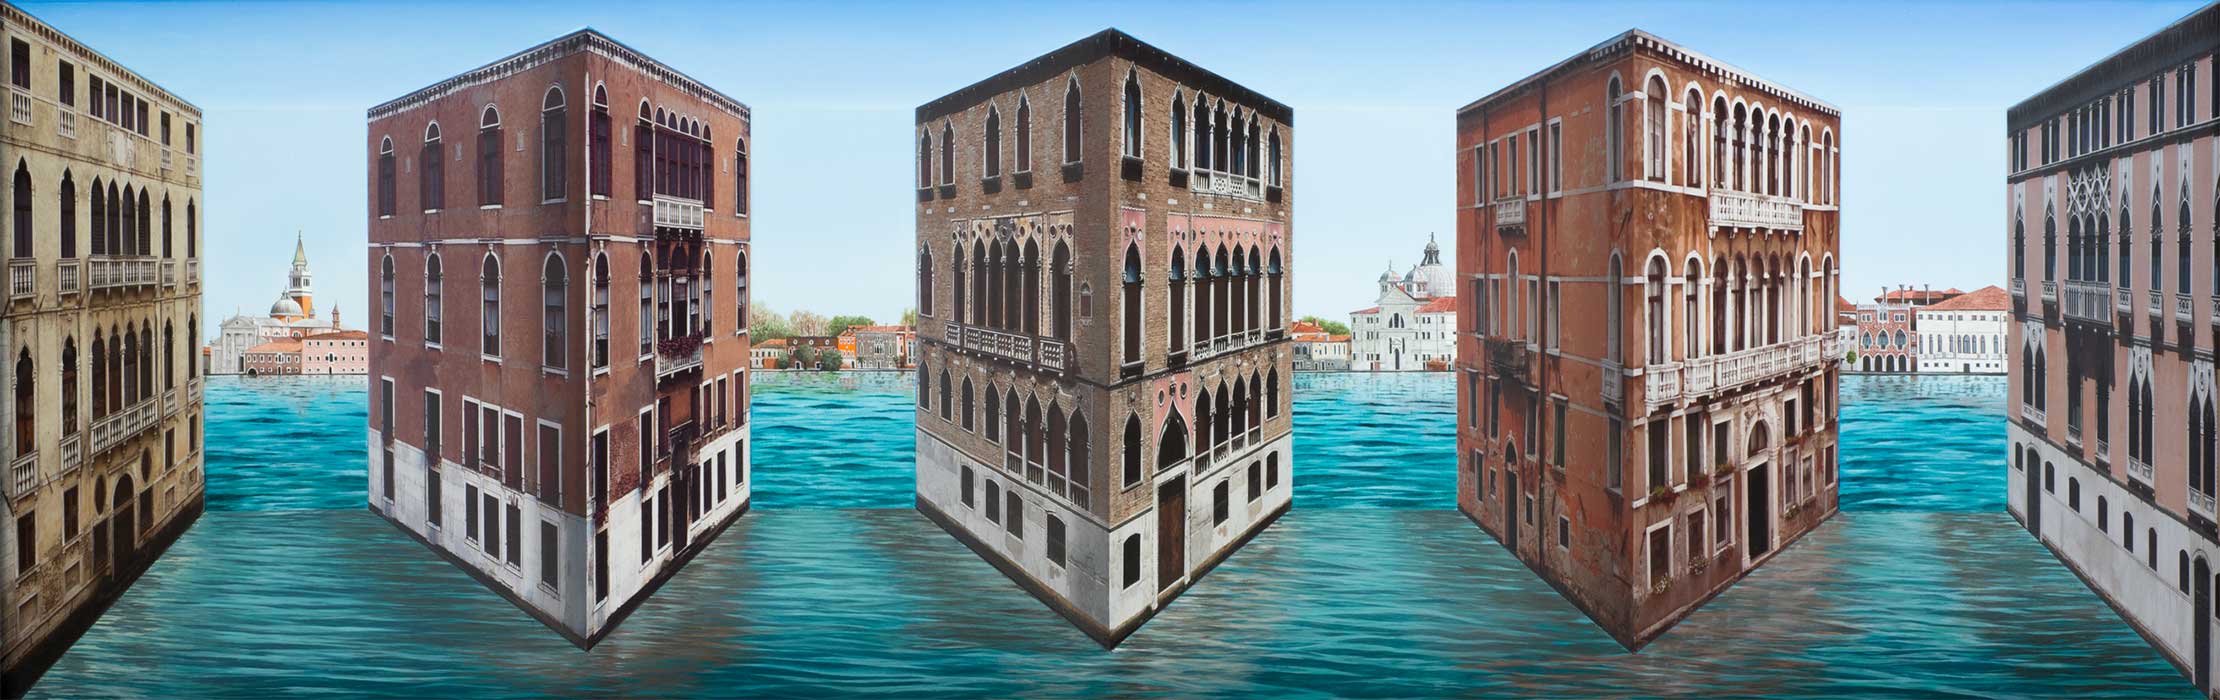 Floating Palazzi <p>2015 | Edition 5 | 51 x 156 x 21 cm / 20 x 61½ x 8¼ in</p>
